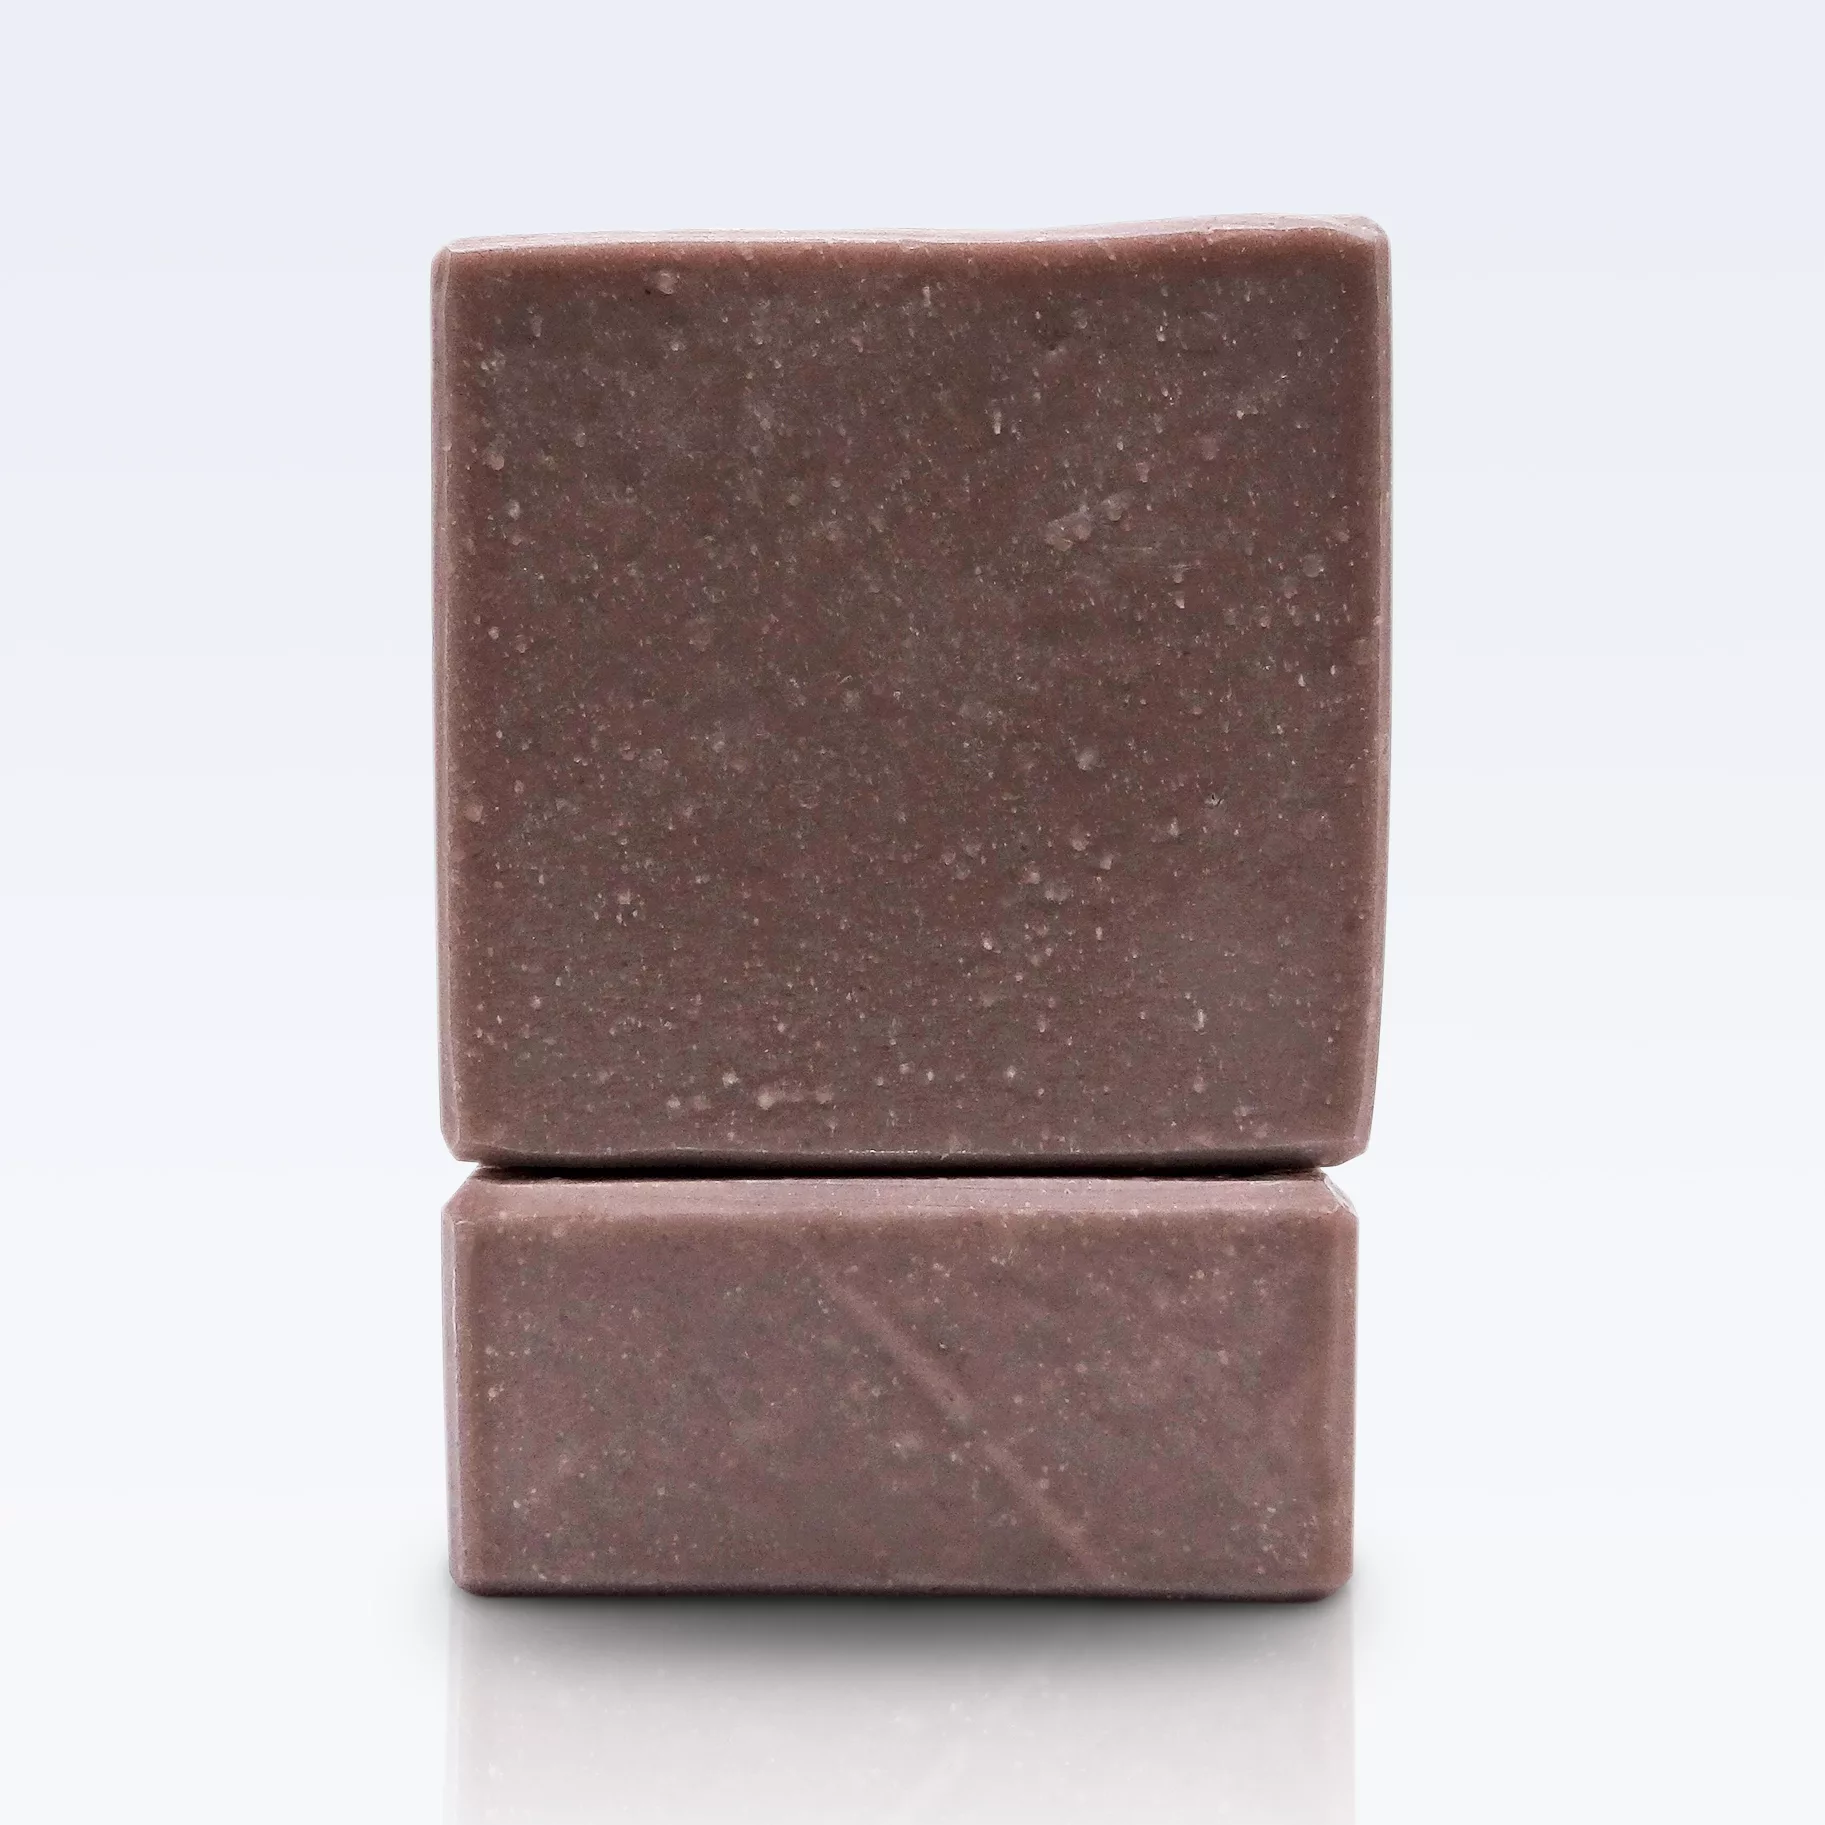 Clay Facial soap by Tubby Tabby Soaps (handmade, unscented, all natural)